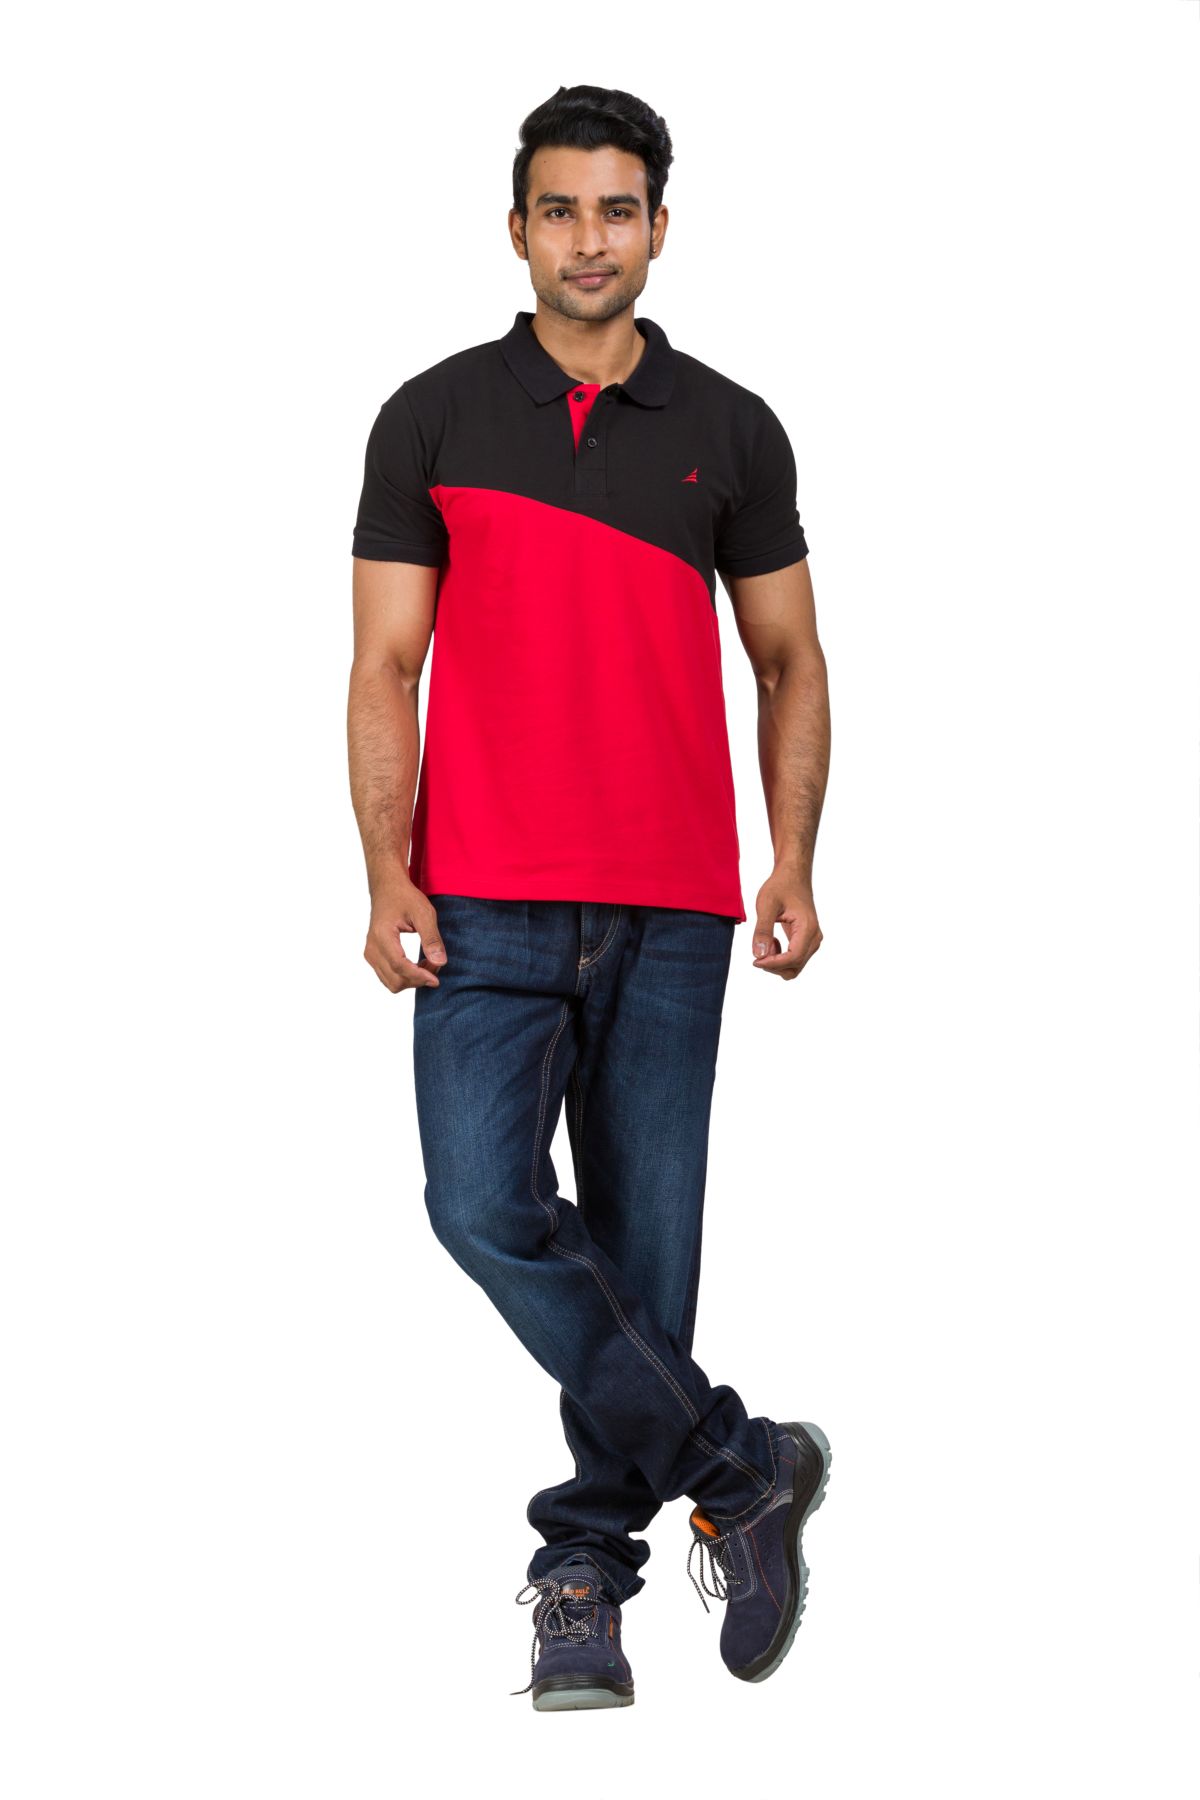 Cotton Blend Polo T-shirt Black-Red for Men